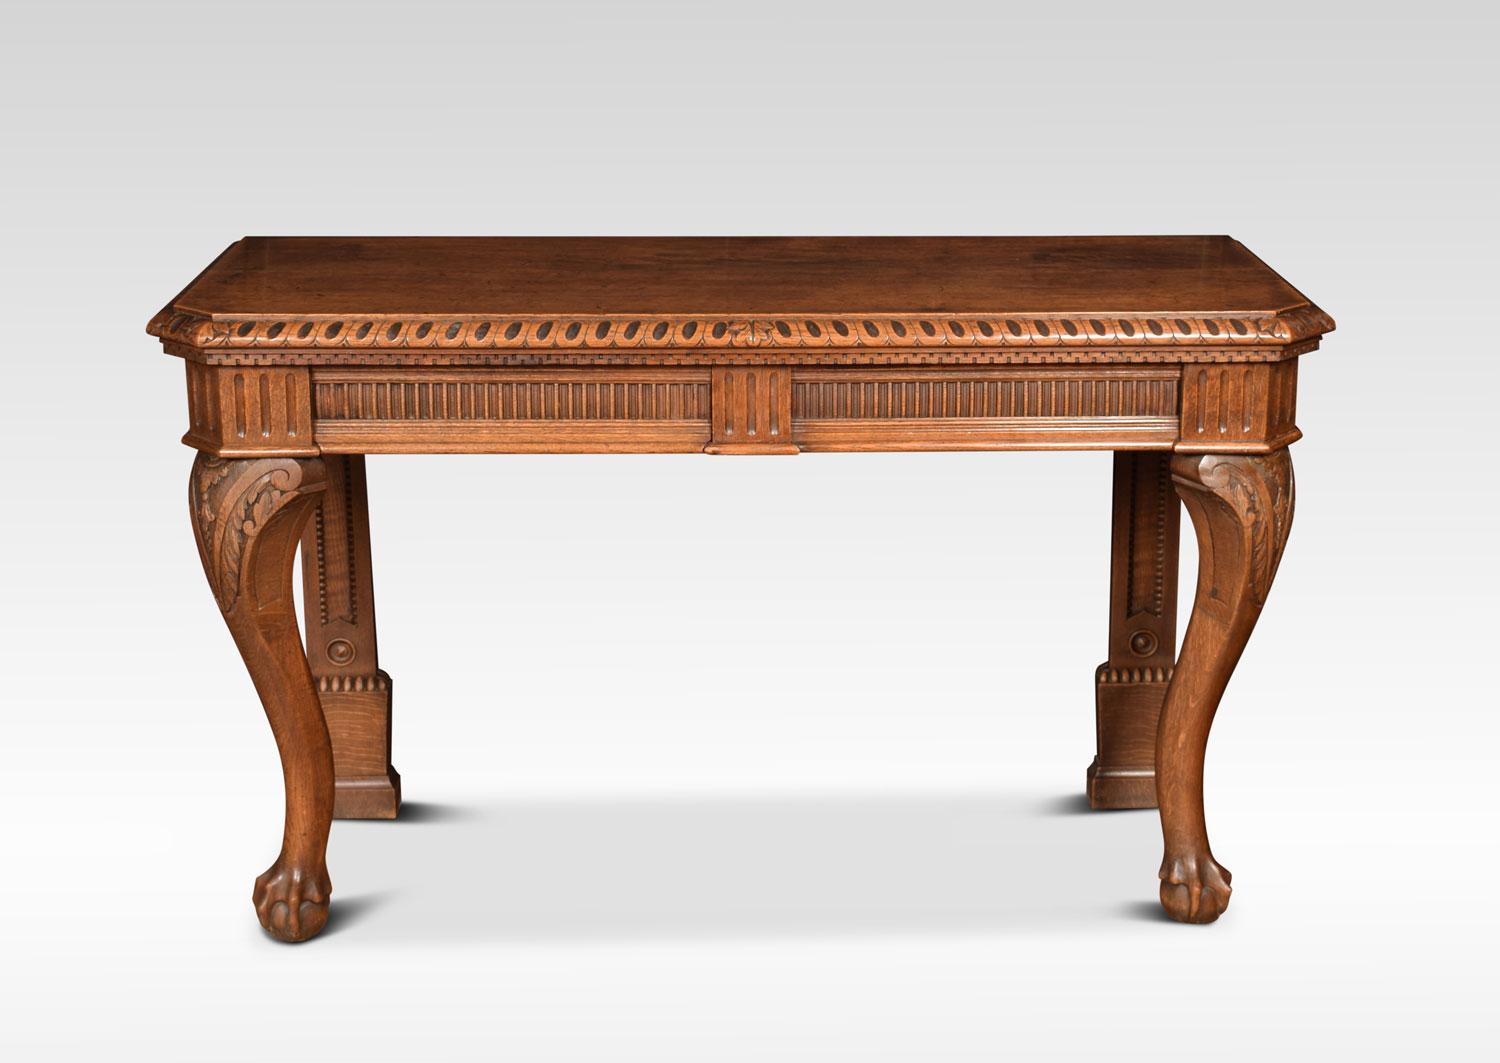 Carved oak console table the large rectangular canted top with carved edge. Above two drawers freeze draws. All raised up on acanthus carved cabriole legs with ball and claw feet.
Dimensions
Height 36 Inches
Width 60 Inches
Depth 23 Inches